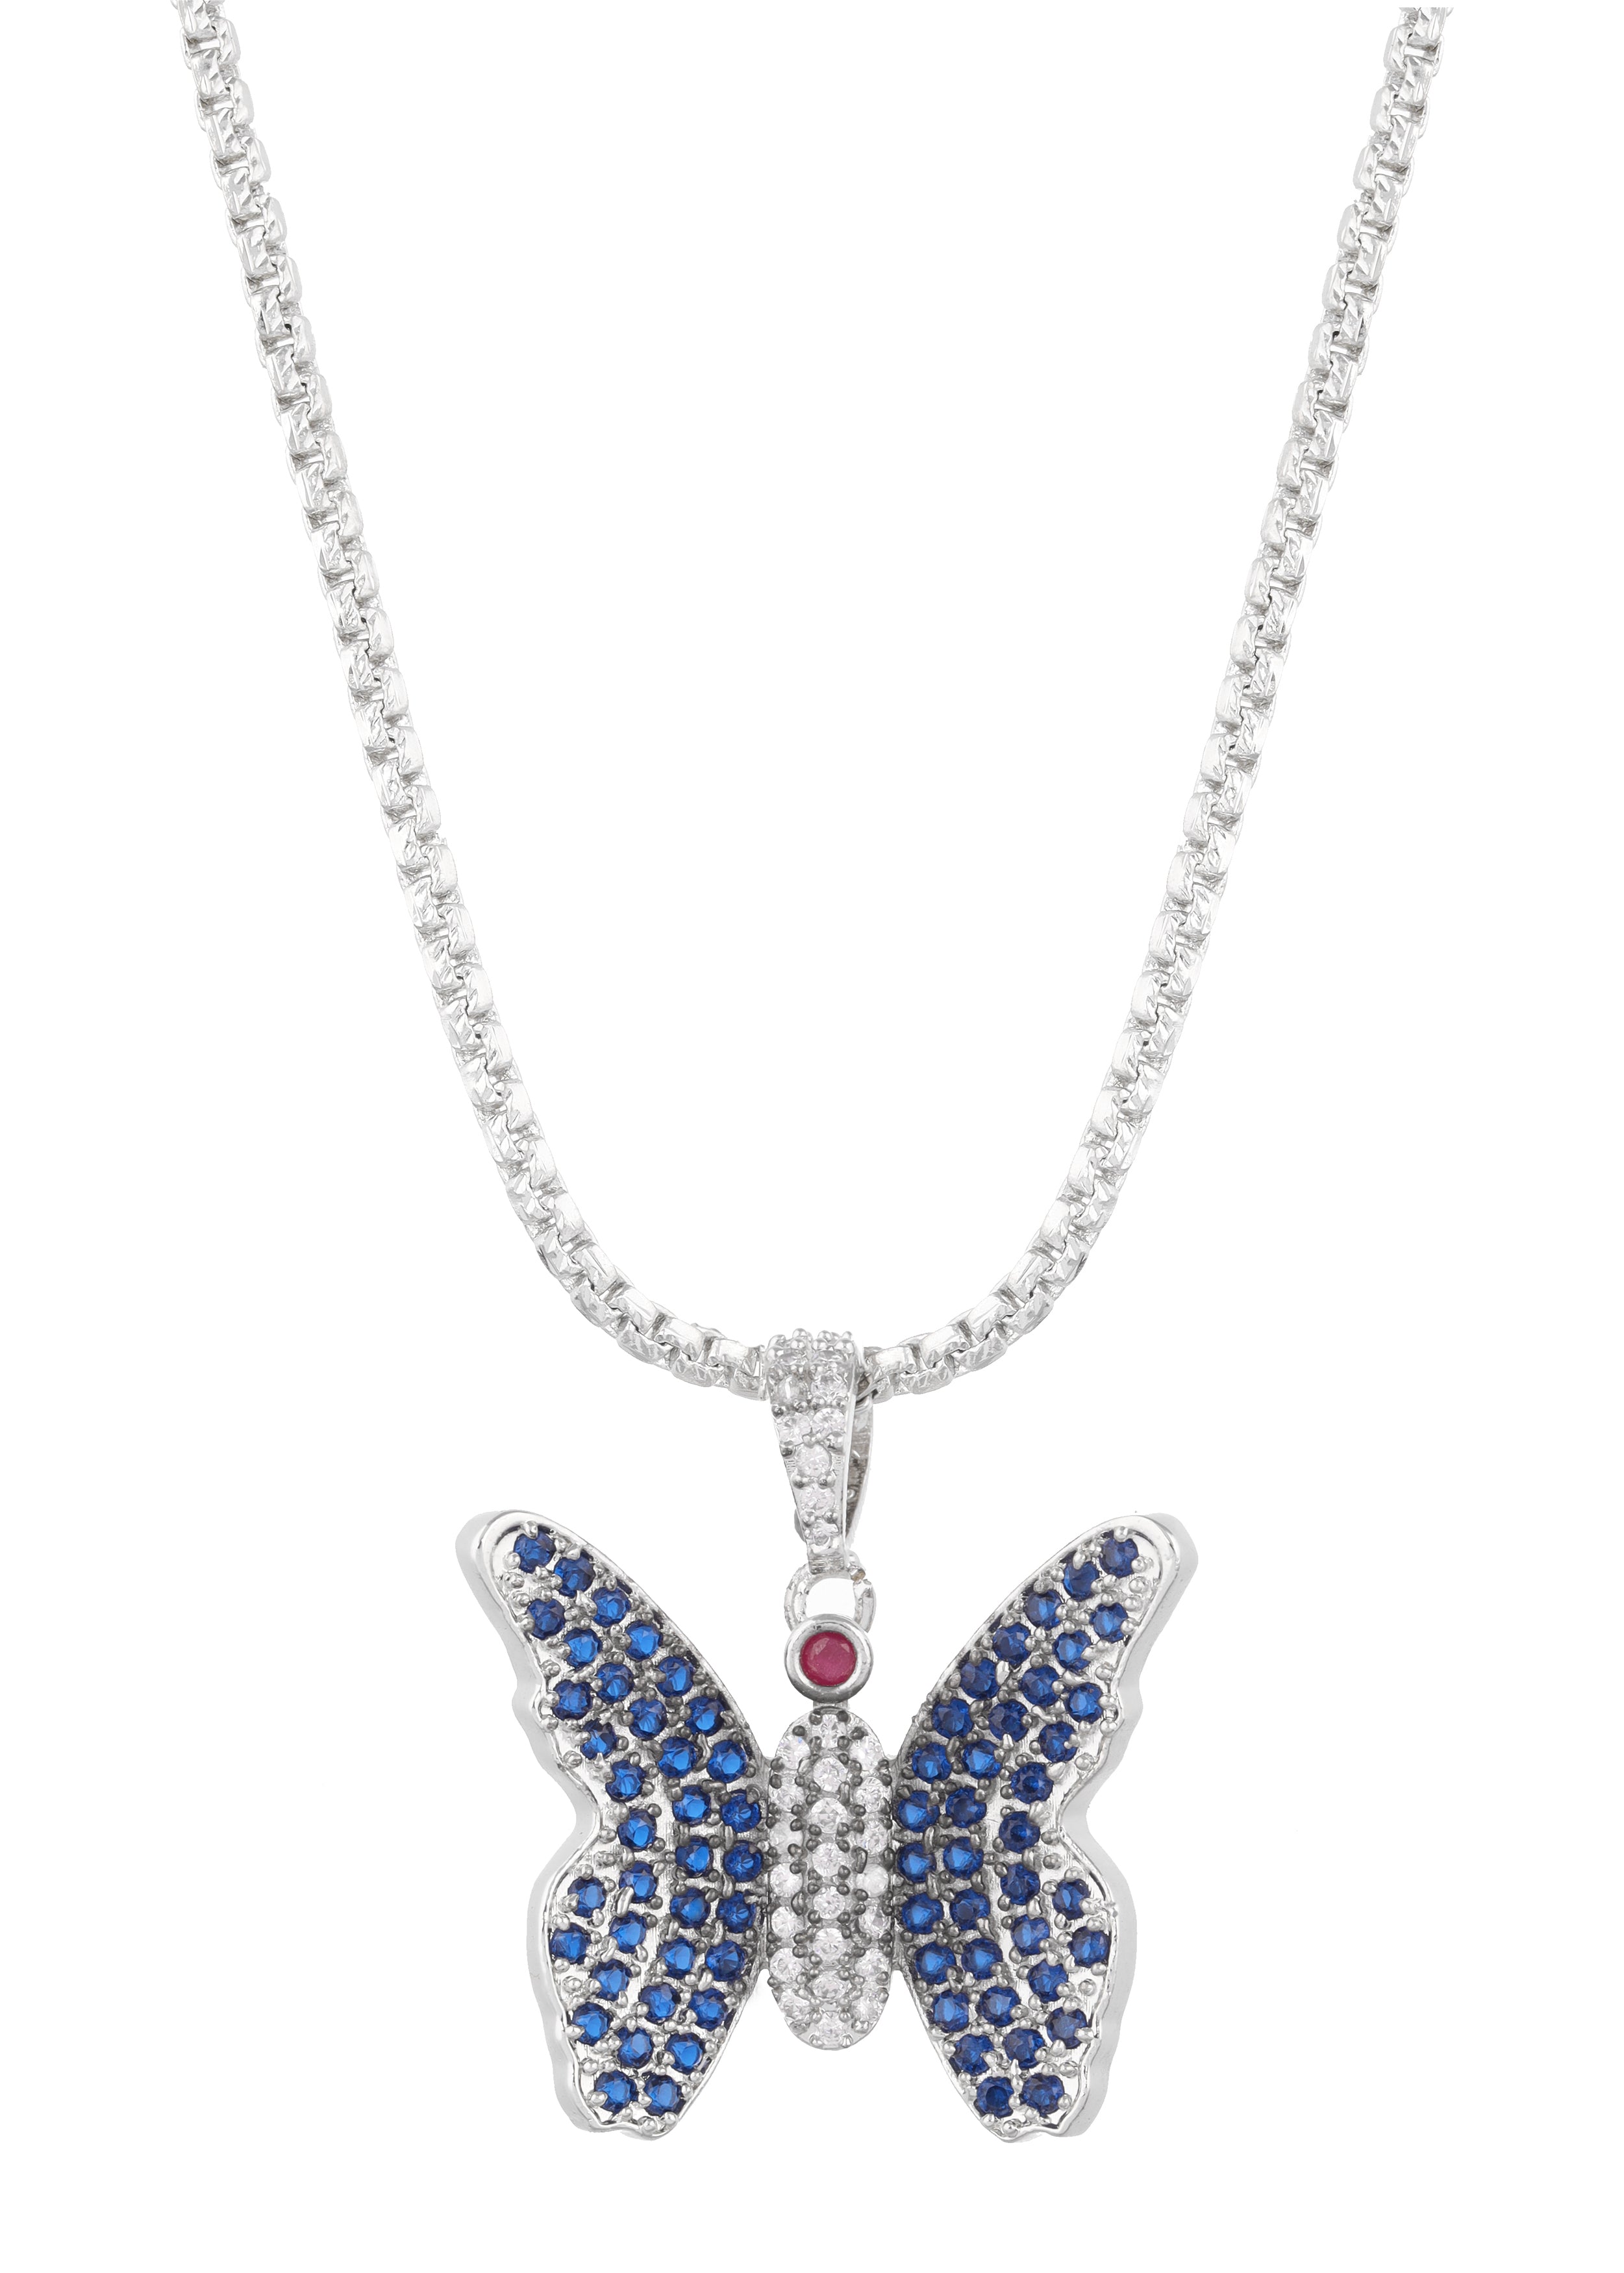 Vita Bella Rhodium Plated Cubic Zirconia Studded Butterfly Pendant with Chain